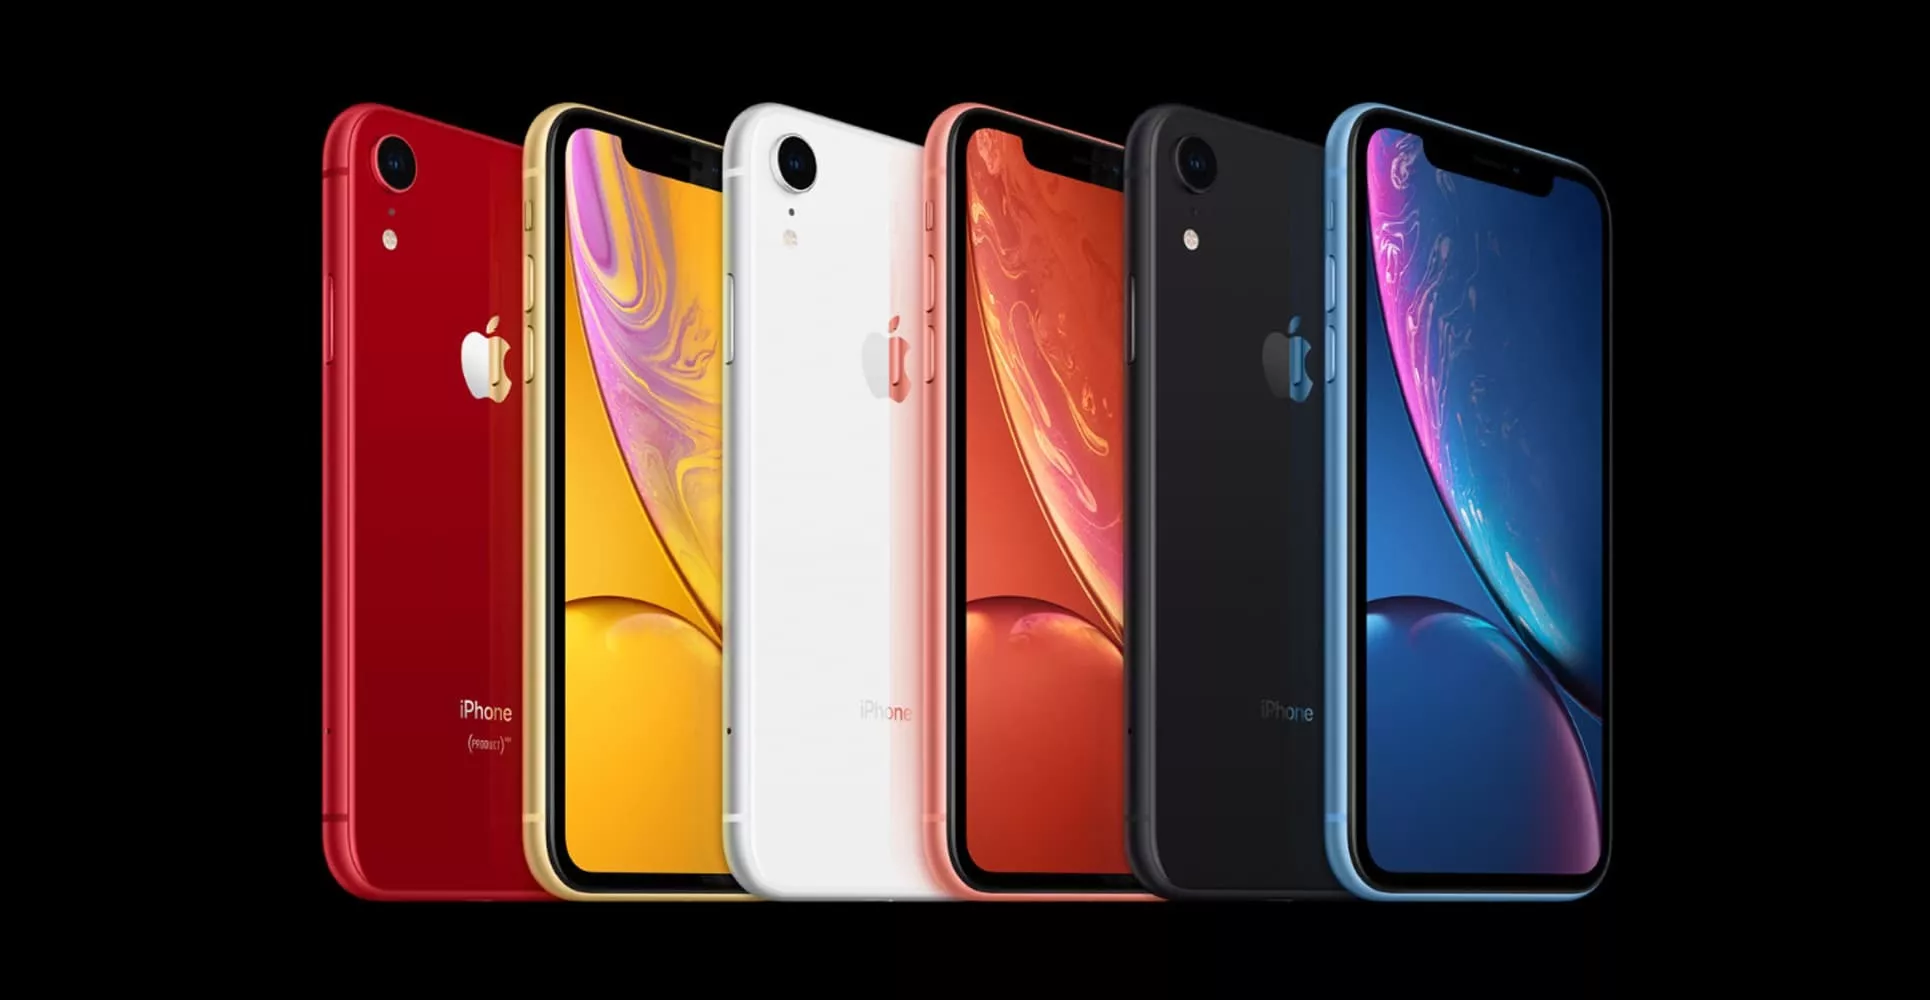 iPhone XR 64GB (Coral)